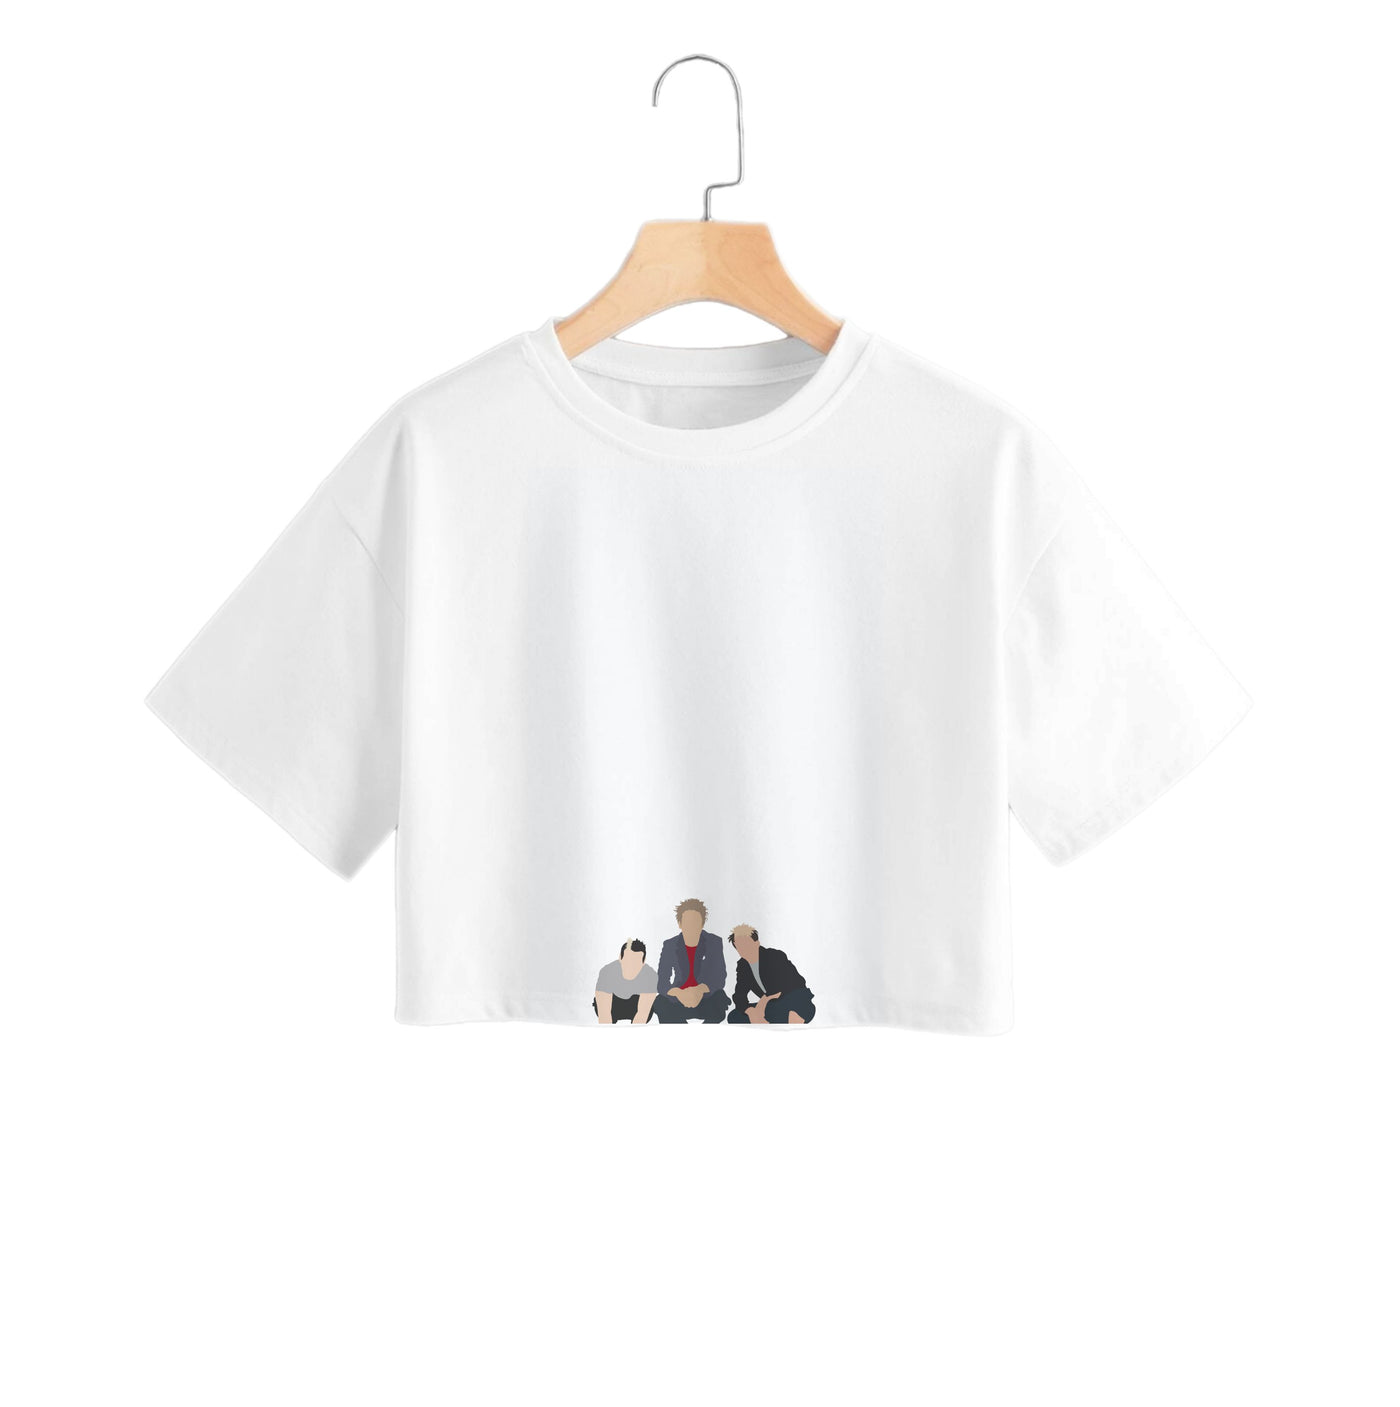 The Boys - Busted Crop Top